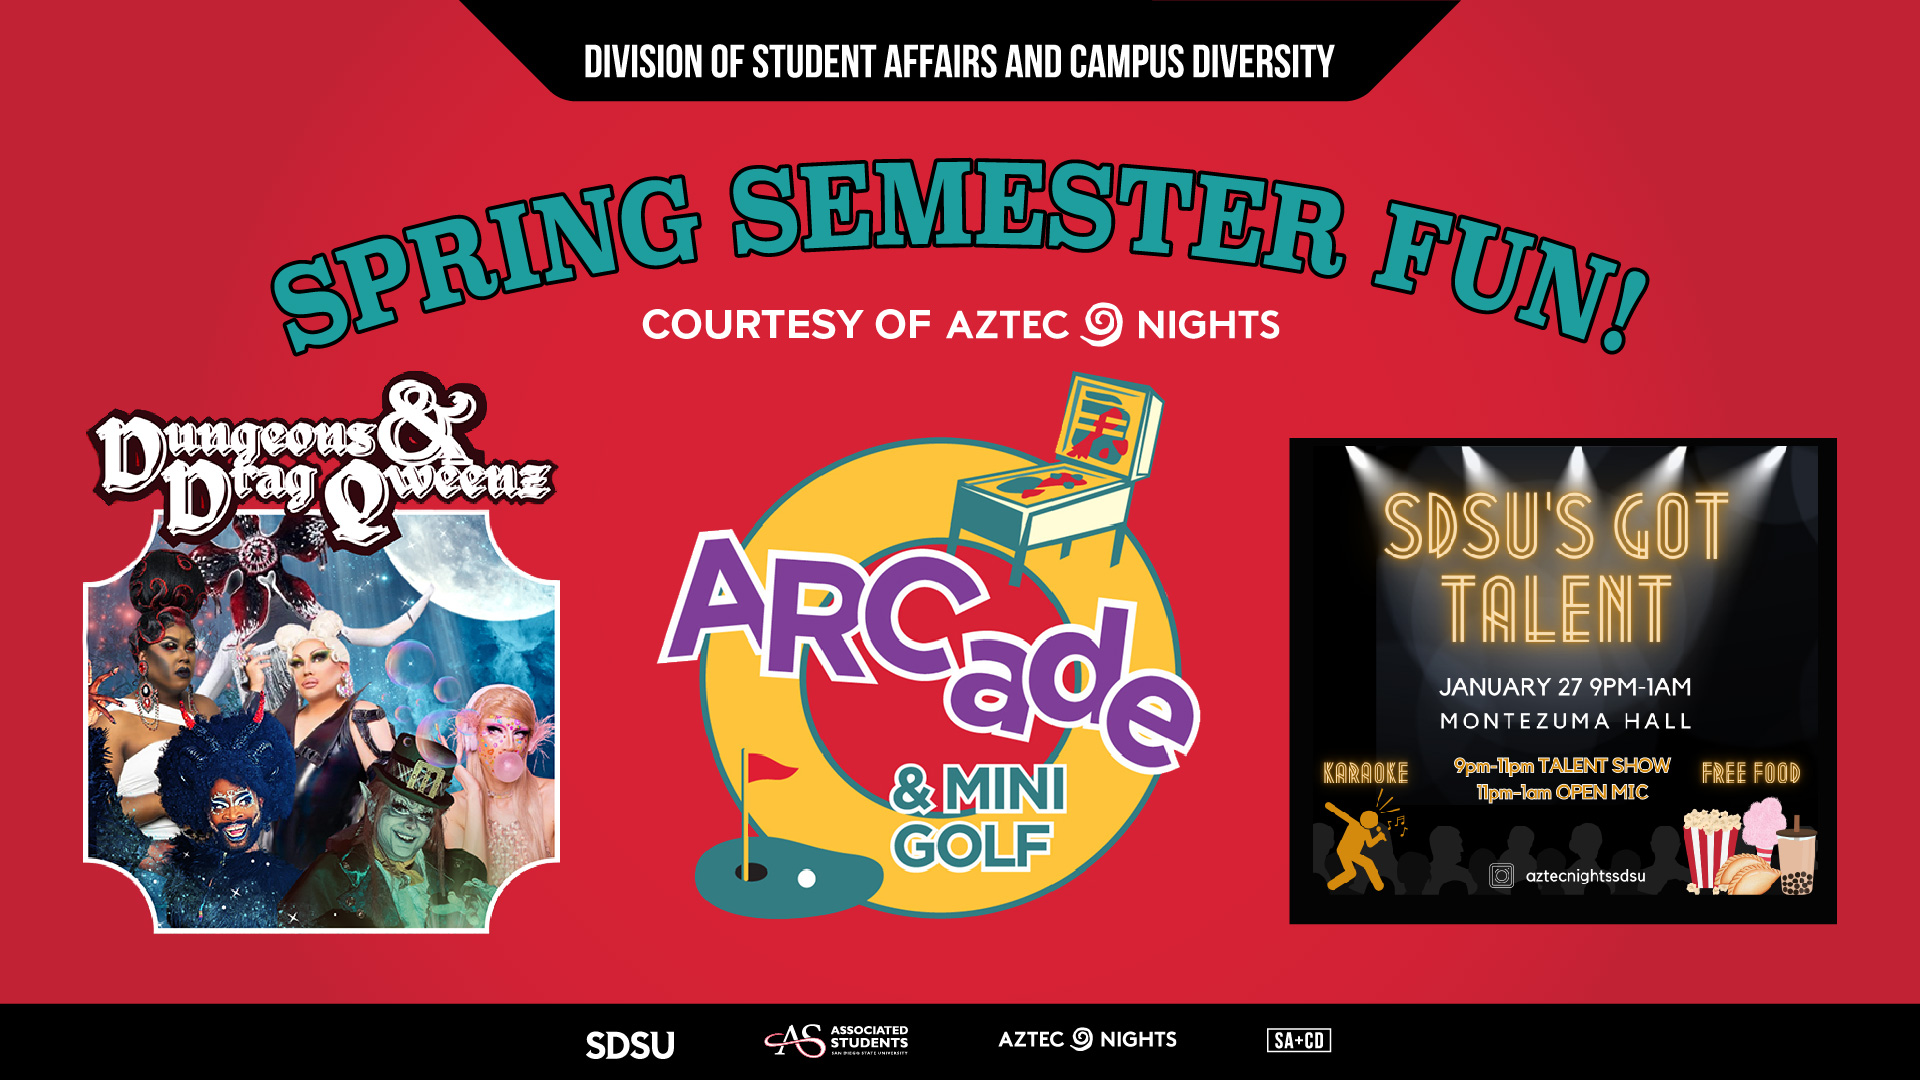 red background with teal text that says 'Spring Semester Fun!' and white text underneath that says 'Courtesy of Aztec Nights' and below it are three event images of Dungeons and Drag Qweenz, Acrade & Mini Golf, and SDSU's Got Talent